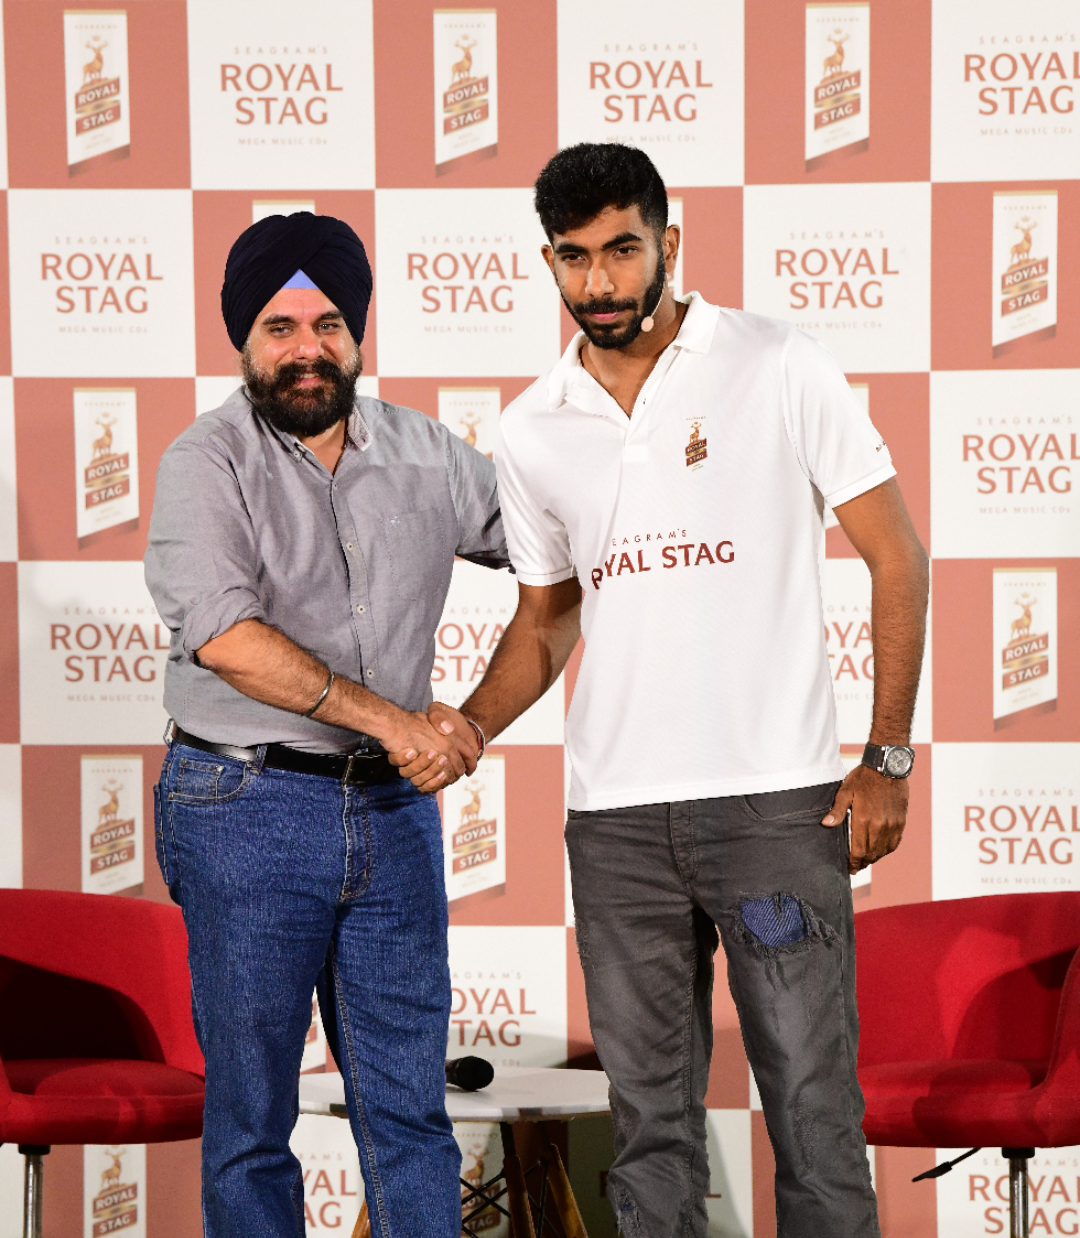 Kartik Mohindra, CMO, Pernod Ricard India welcoming Jasprit Bumrah on board their Dream Team as Seagram’s Royal Stag Brand Ambassador Stag